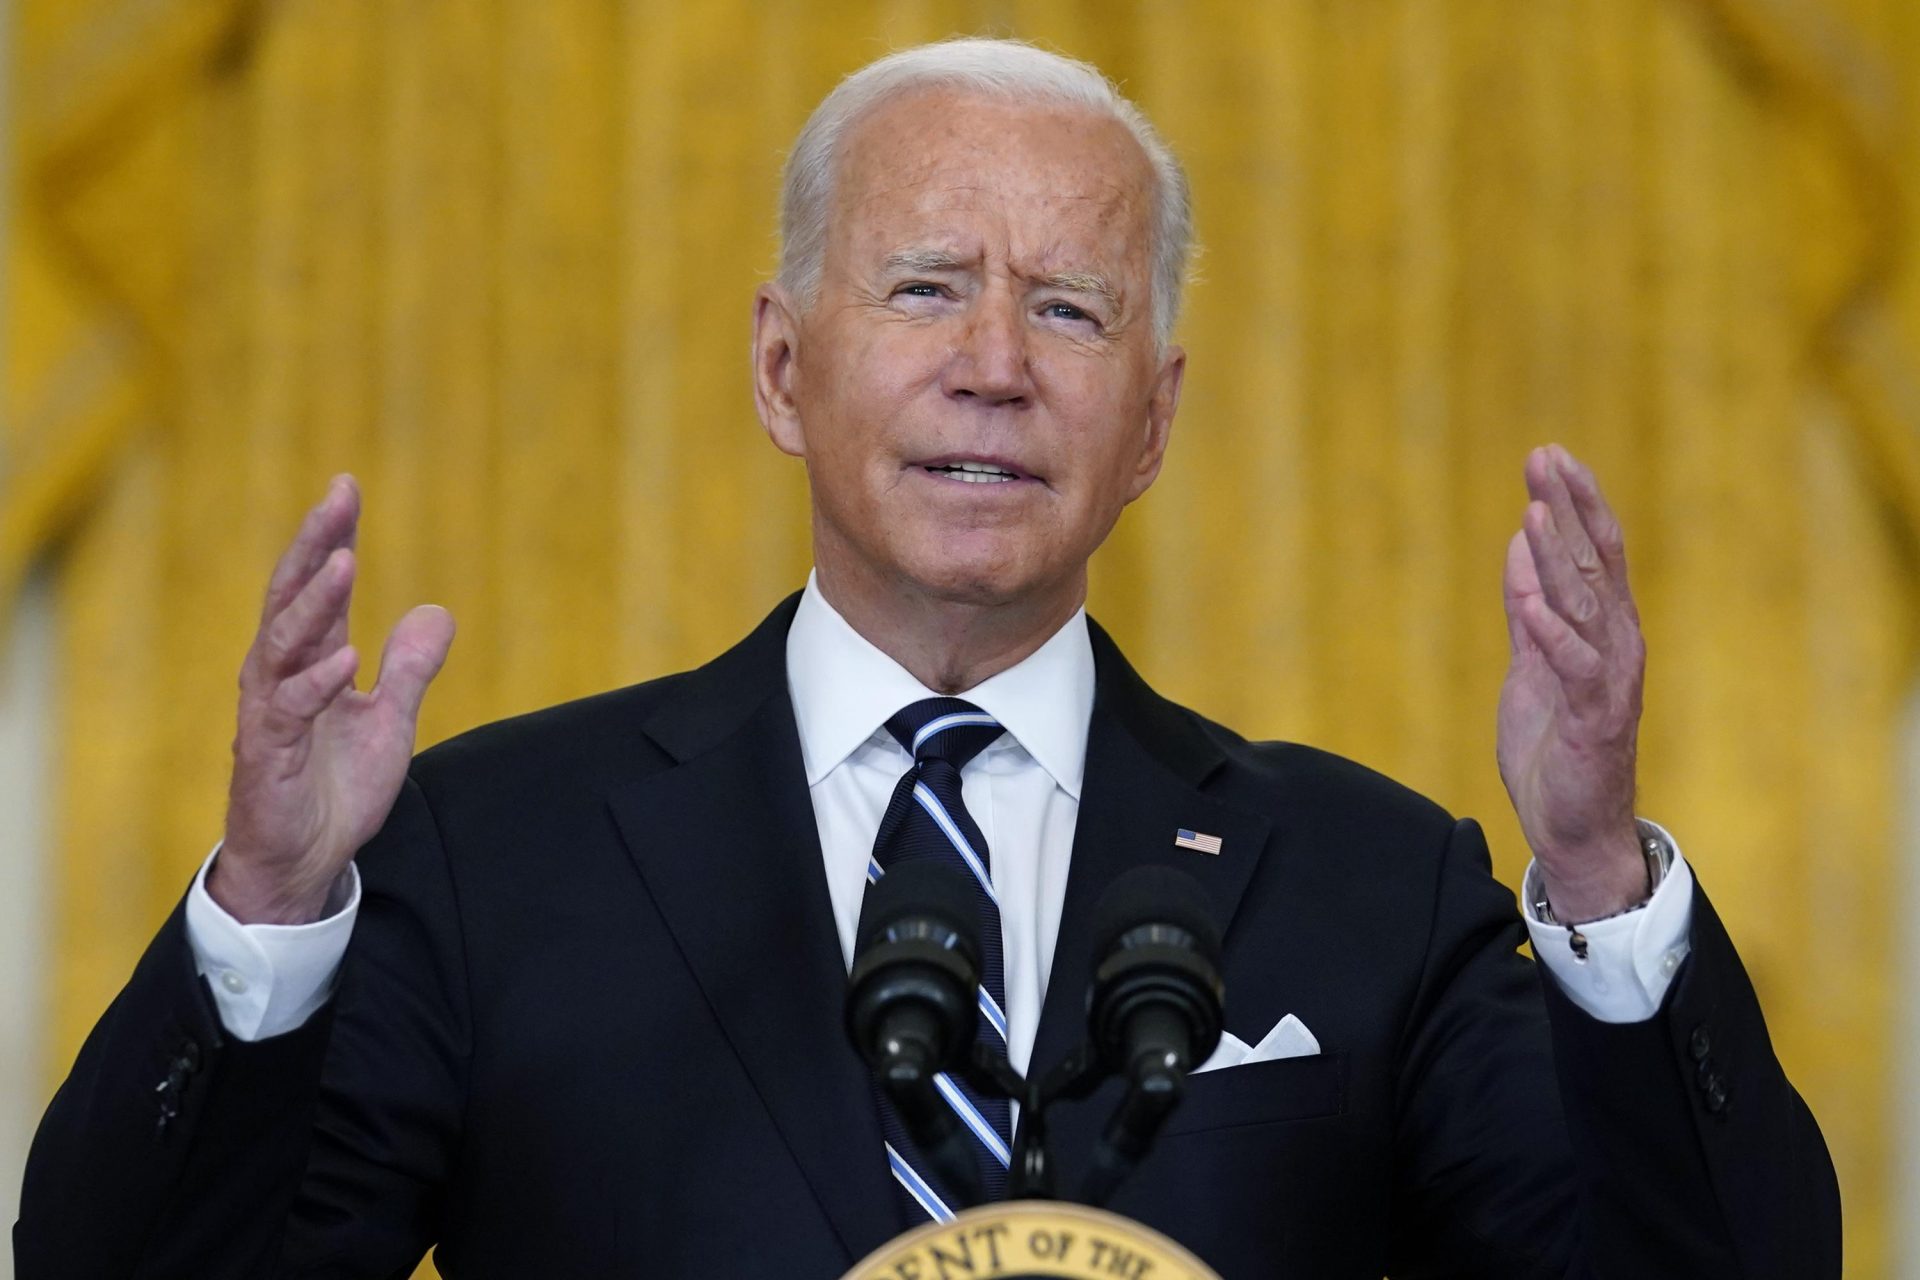 Biden to require COVID vaccines for nursing home workers